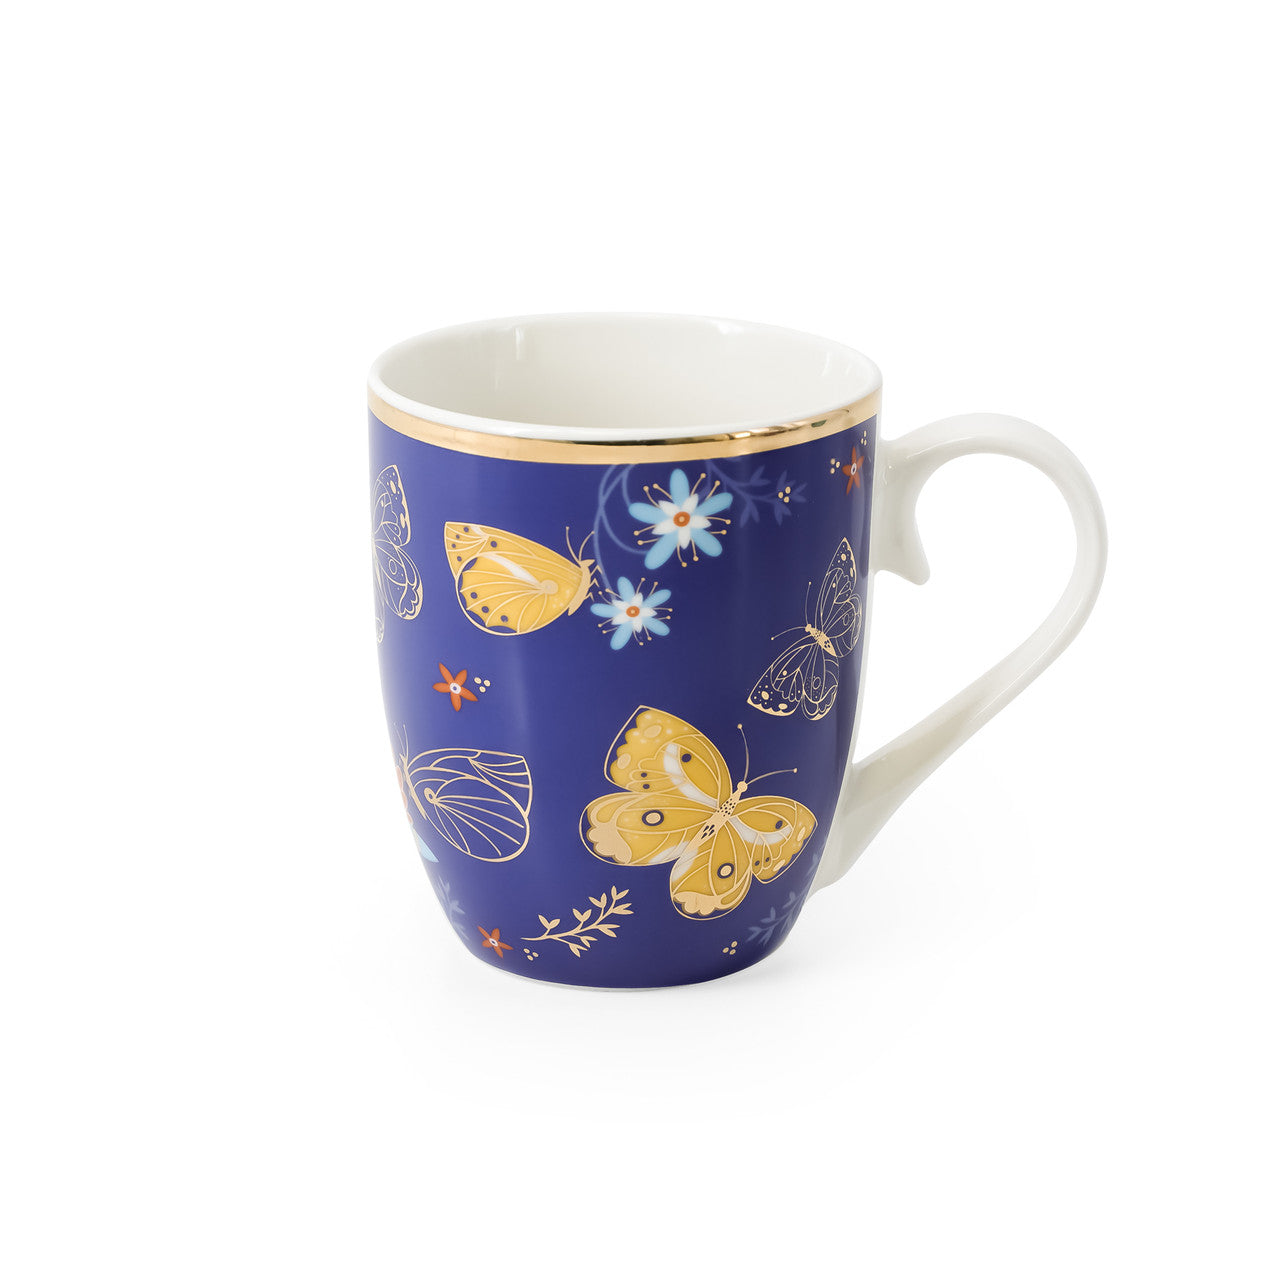 Tipperary Crystal Butterfly Mugs Set of 4  Drawing inspiration from urban garden, the Tipperary Crystal Butterfly collection transforms an icon into something modern and unexpected. Playful and elegant, this collection draws from the inherent beauty of the butterfly.